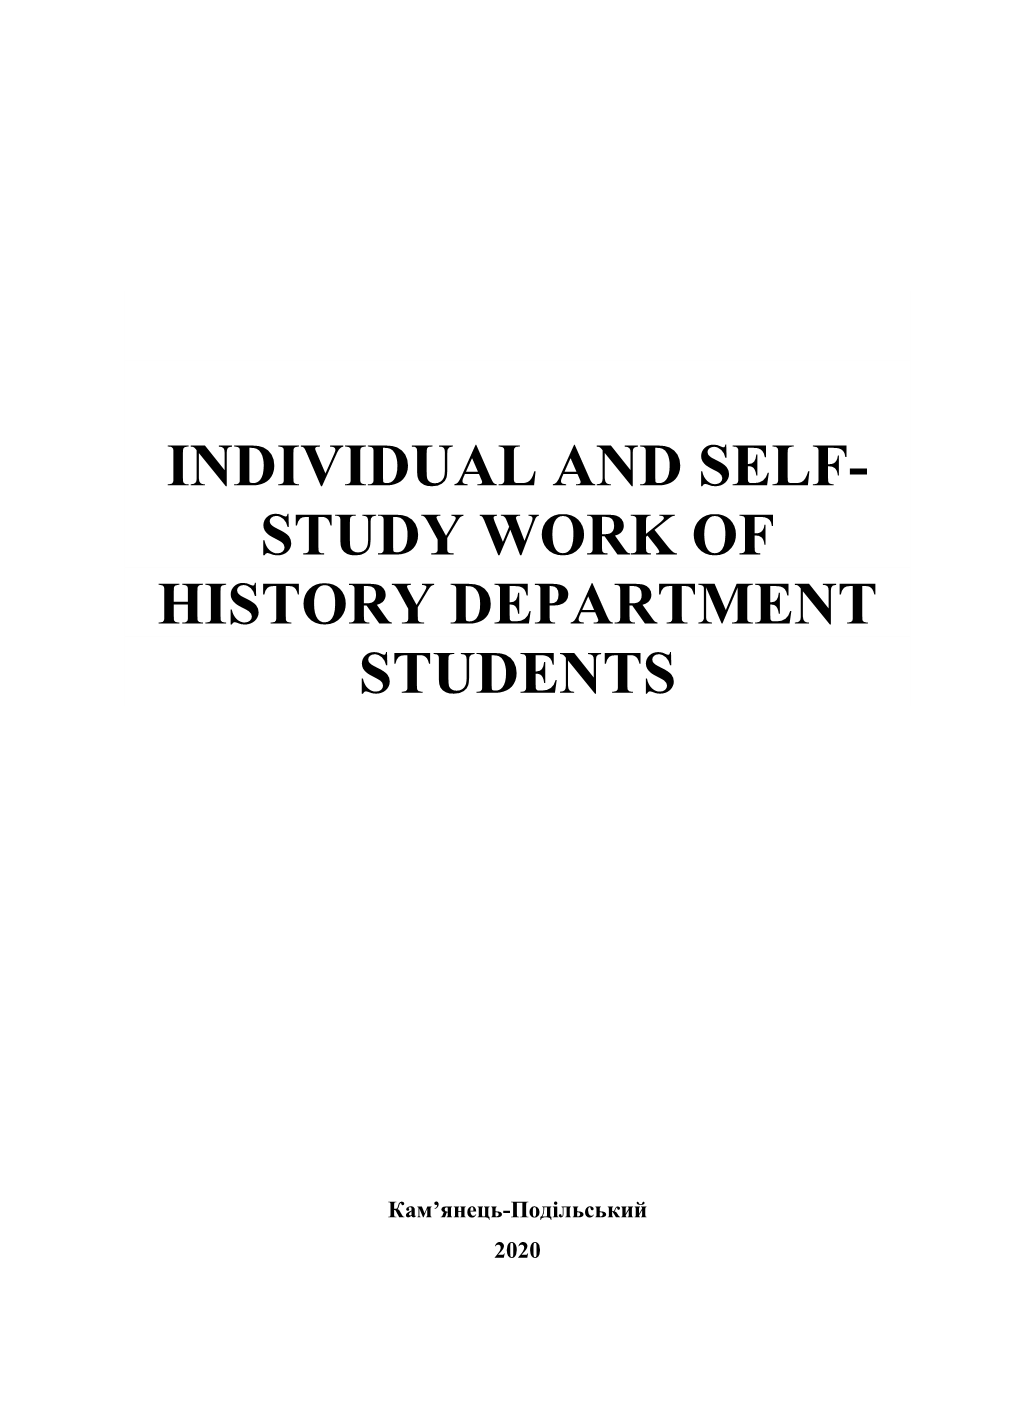 Study Work of History Department Students